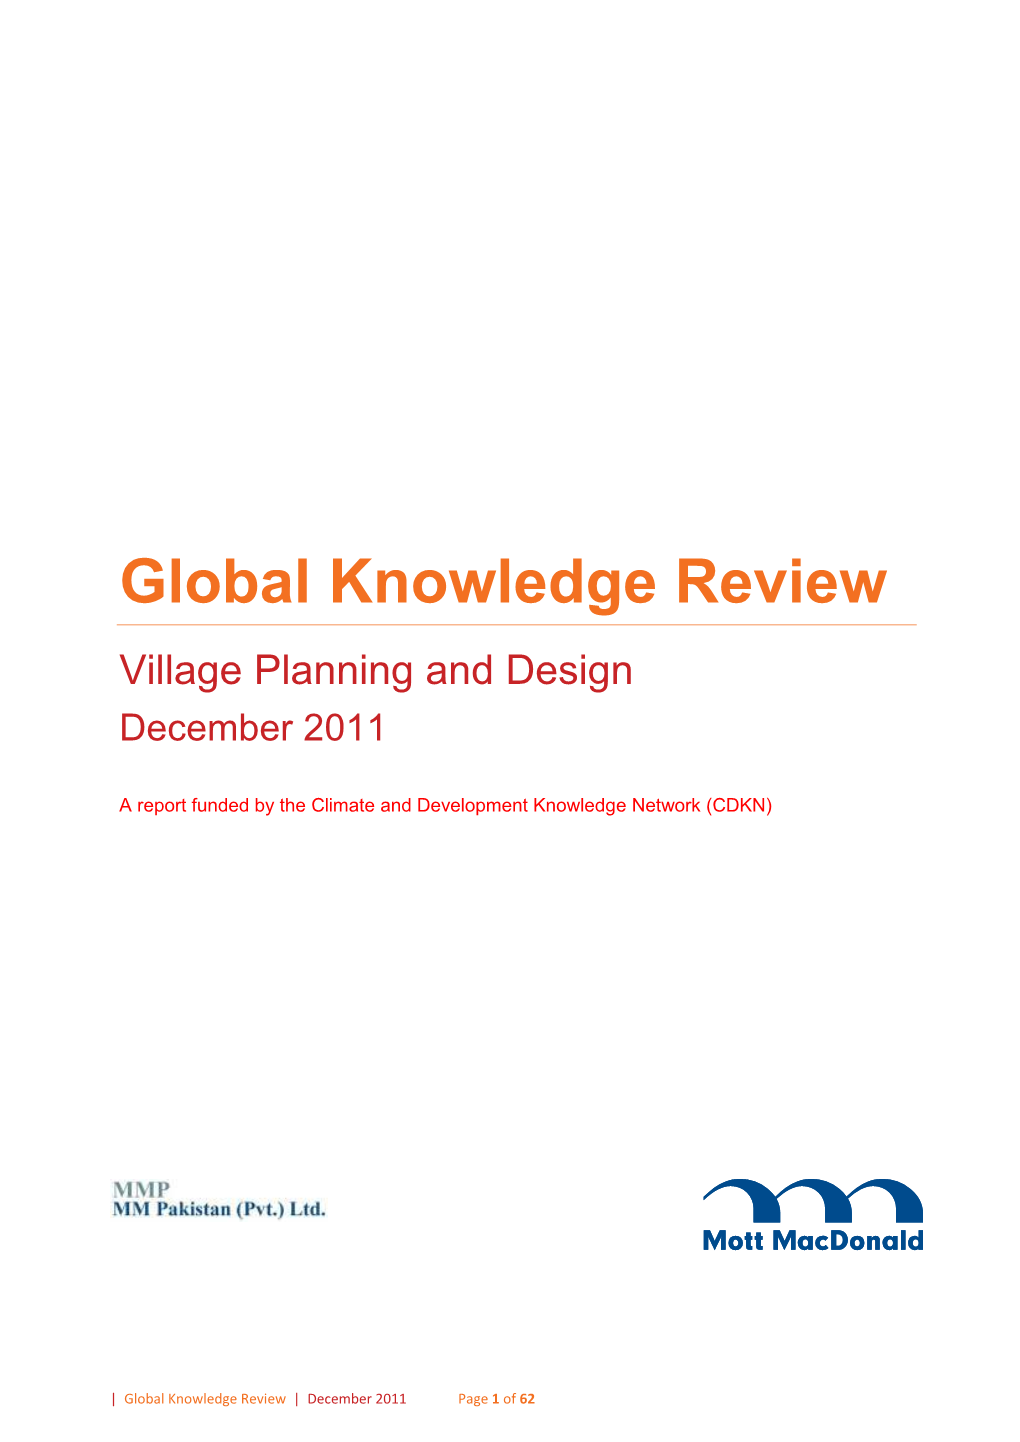 Global Knowledge Review Village Planning and Design December 2011